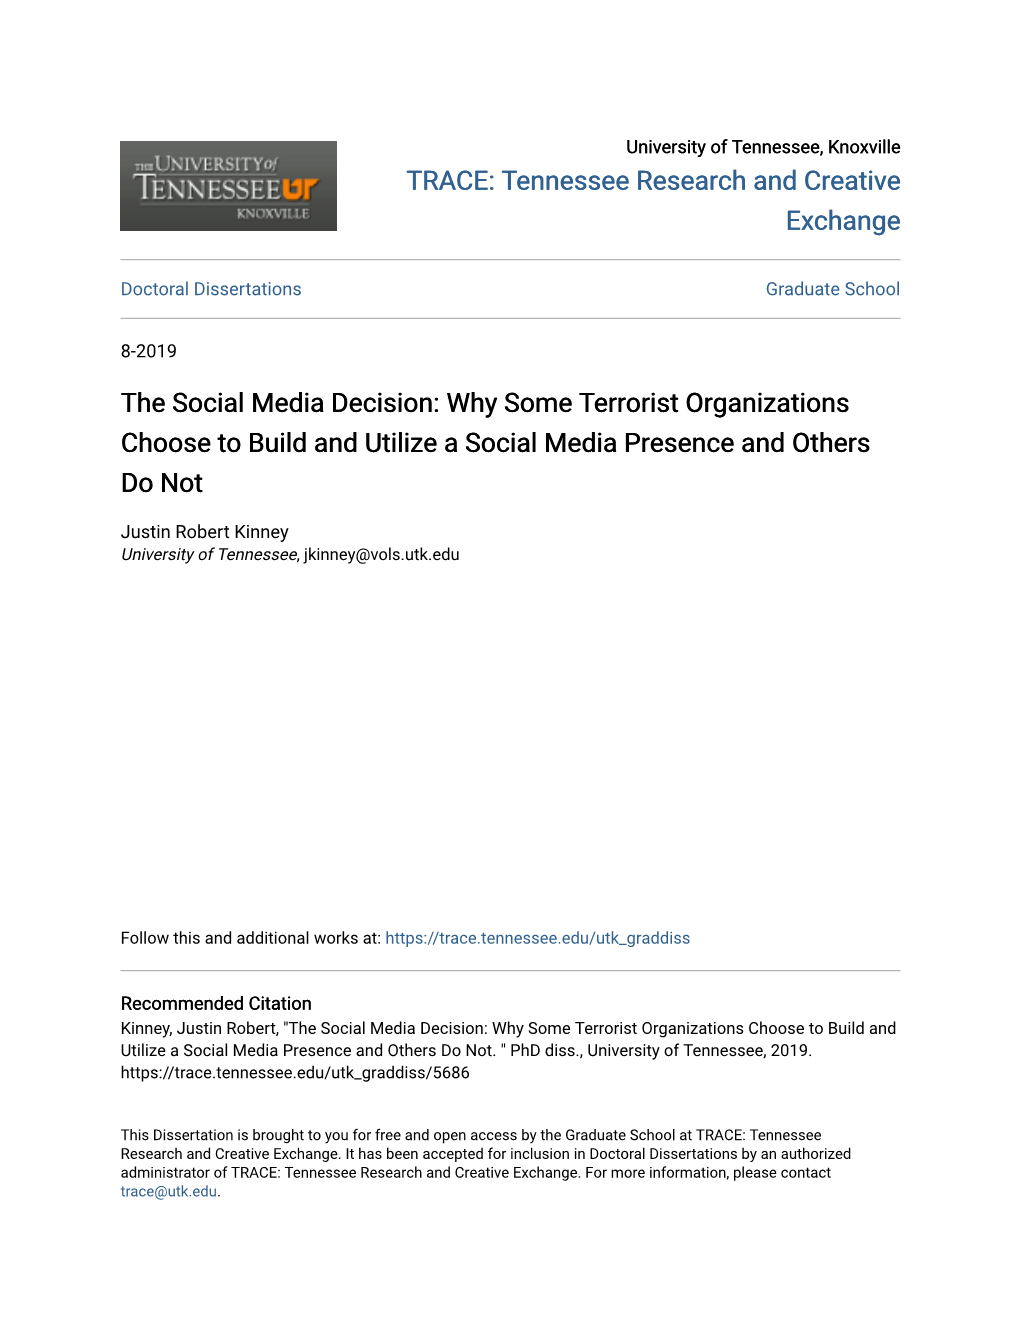 The Social Media Decision: Why Some Terrorist Organizations Choose to Build and Utilize a Social Media Presence and Others Do Not